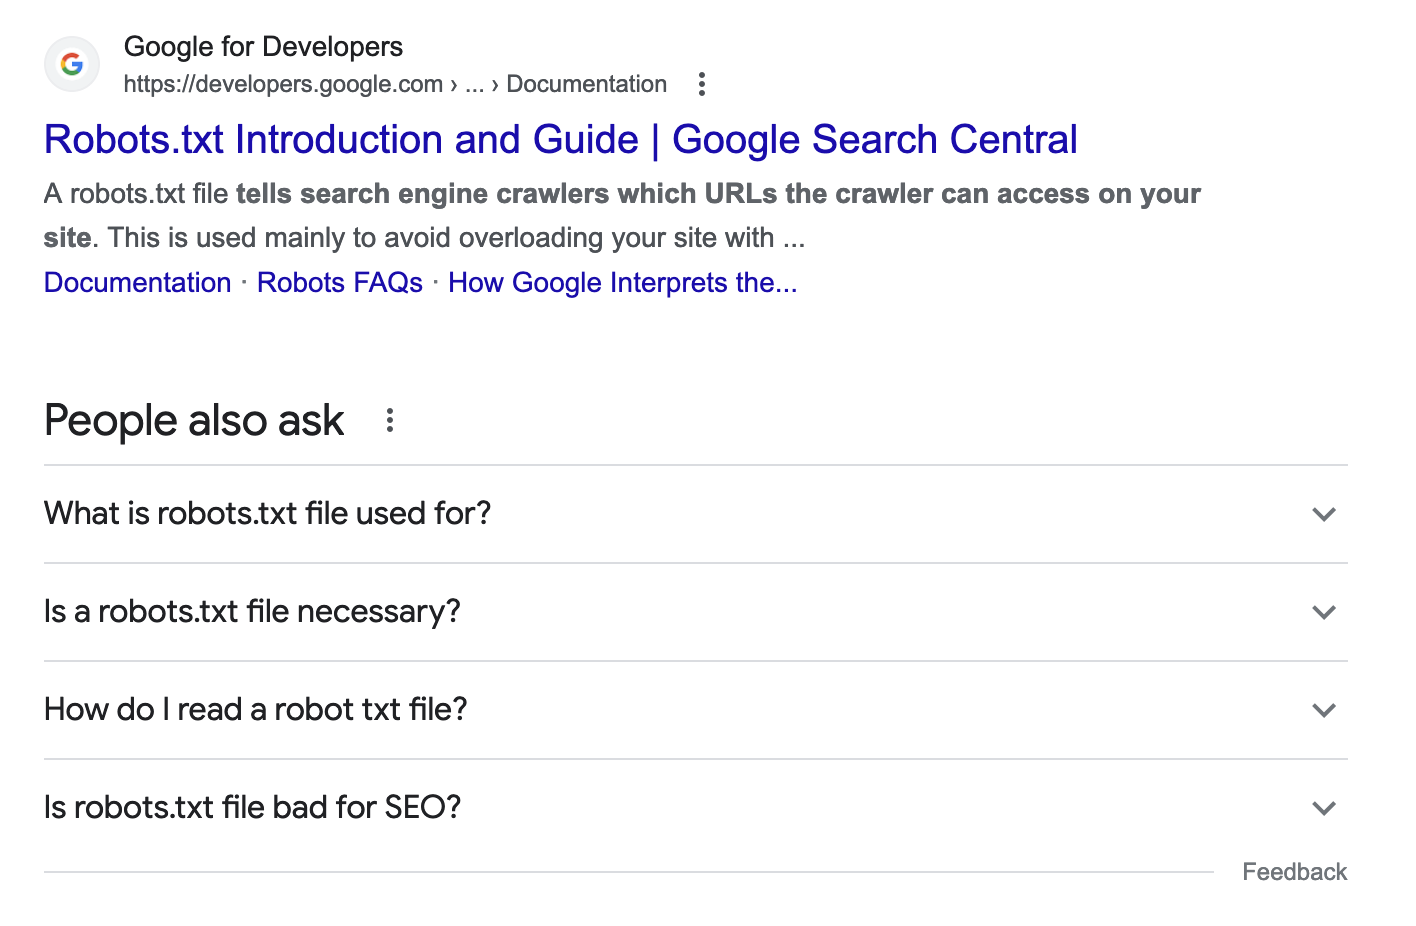 An example of "FAQ" rich snippets.